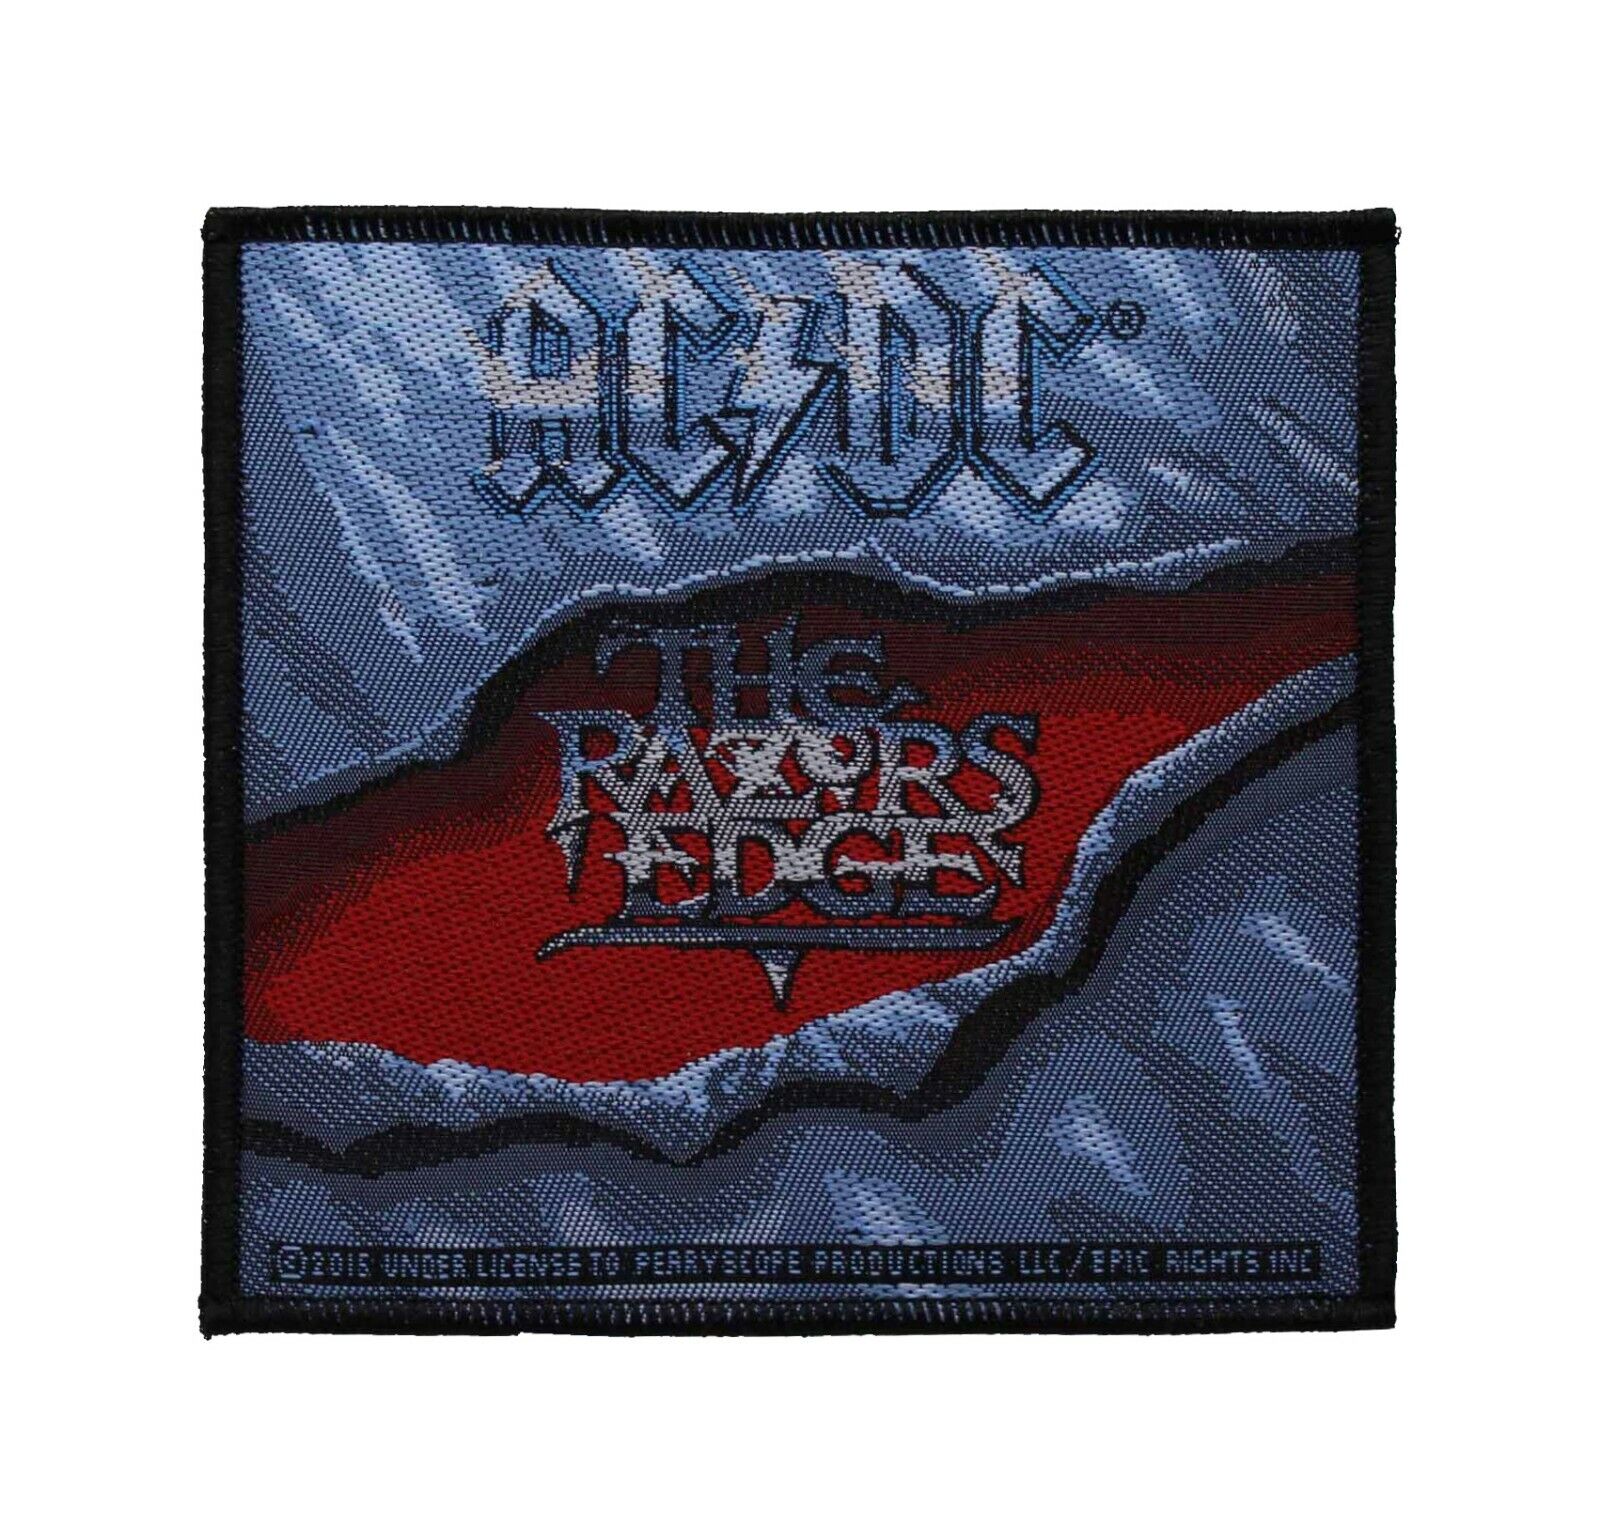 Ac/dc The Razors Edge Woven Sew On Battle Jacket Patch - Licensed 090